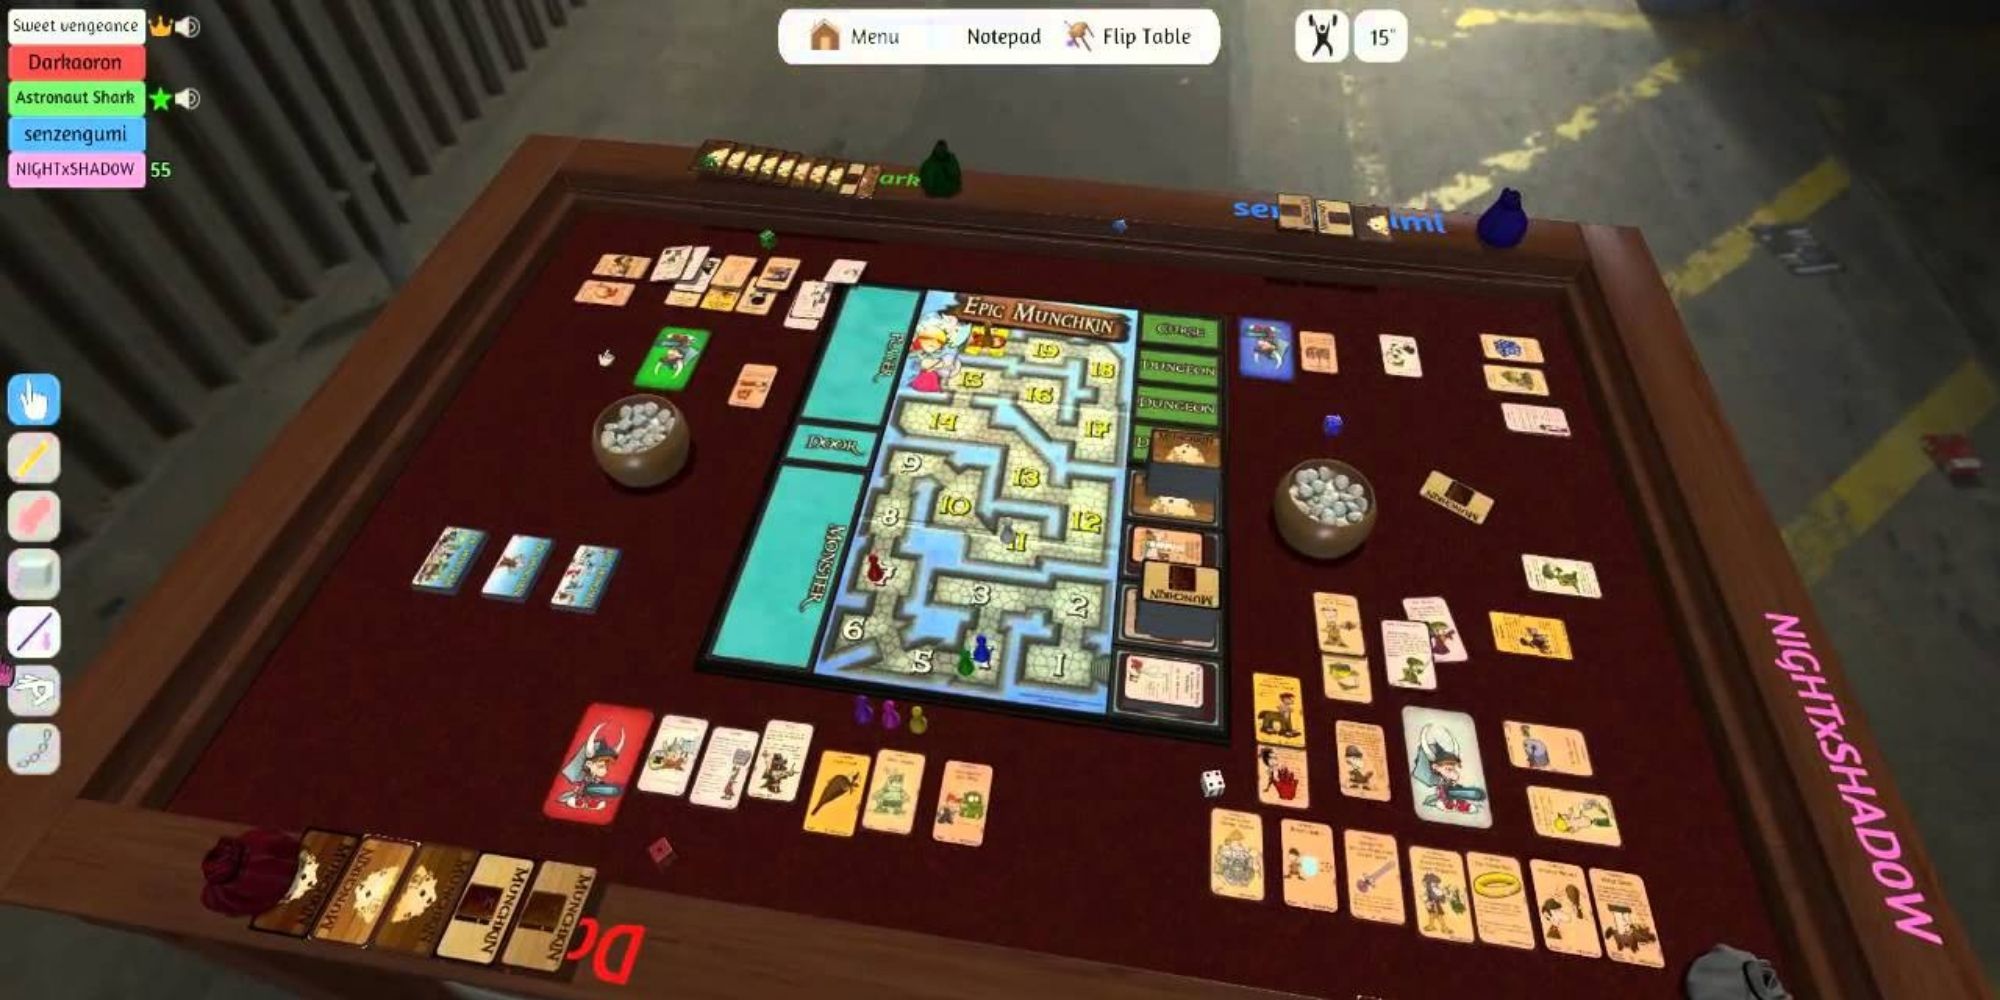 Various cards on the board in Tabletop Simulator